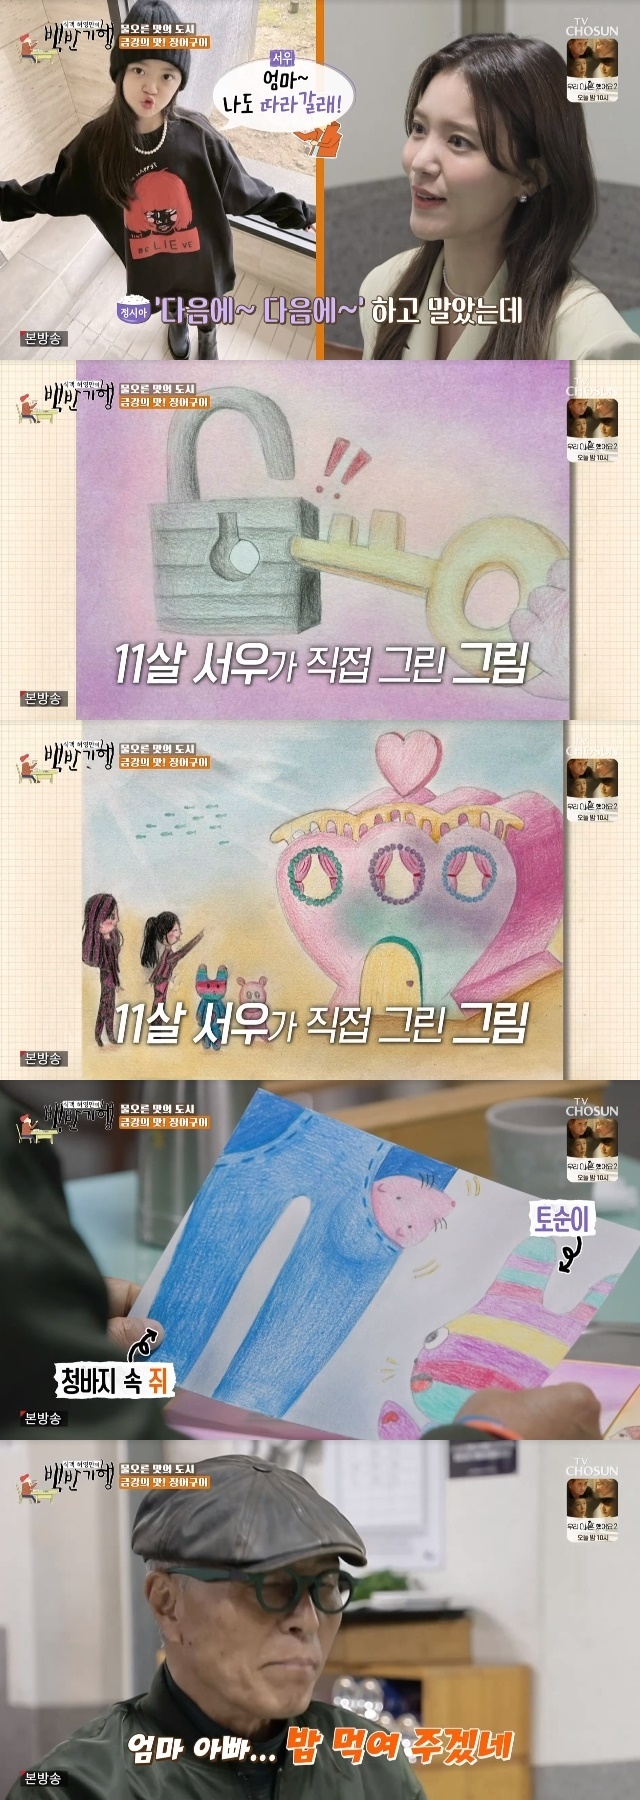 Si-a Jeong daughter was recognized by Huh Young-man for her painting skills.In the 150th episode of the TV Chosun Sikgaek Huh Young-mans White Travel (hereinafter referred to as White Travel) broadcast on April 29, actor Si-a Jeong joined the princesss esophagus trip in Chungnam.Si-a Jeong said, I told her I was going to shoot today, so she wanted to follow me. Next time. My daughter likes to paint. Shes 11 years old.I brought it to show it to the teacher. He then took out a picture of his daughter, Seo-woo, and explained, I had a story, but I brought it in the middle.Huh Young-man confirmed that daughter painted it in the quality of the painting, and Si-a Jin said, I have been writing and writing all day since I was a child.Ive been torn up at art competitions, she boasted of her daughter.Huh Young-man, who carefully examined the picture, said, This is enough to give the child a mother and a father.Si-a Jin was genuinely delighted and laughed, saying, Thank you, I think I should give you some kind of a blessing.